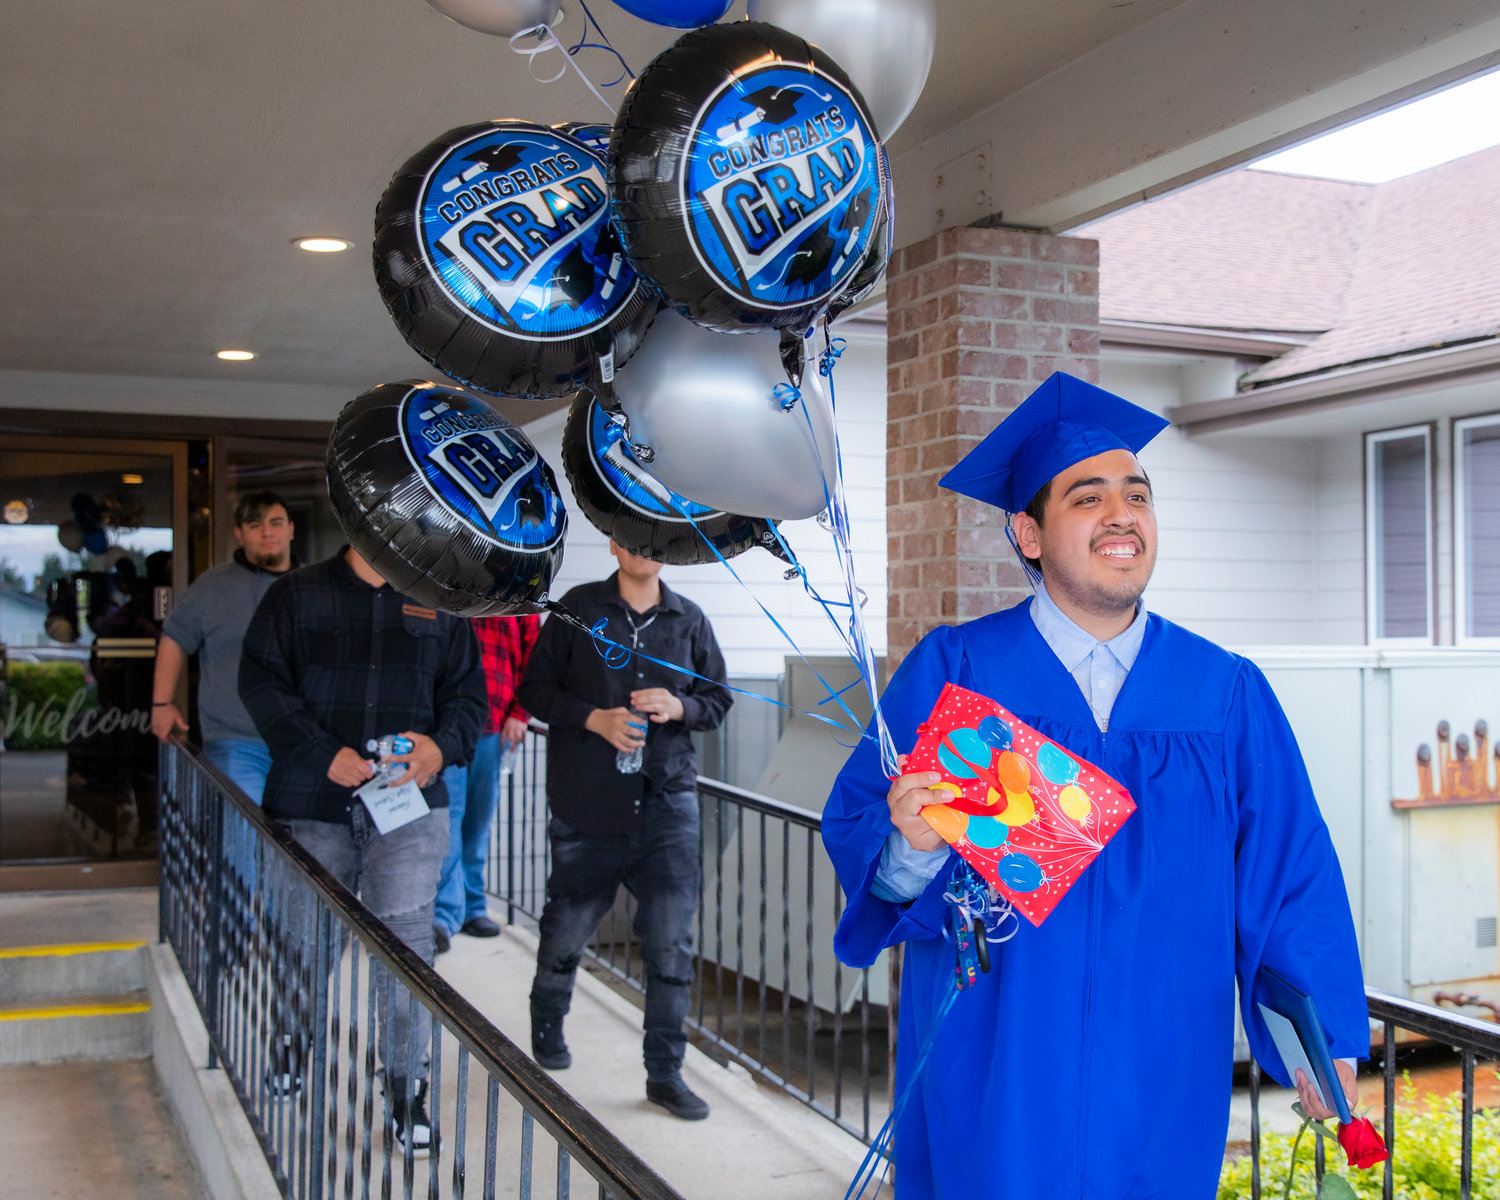 Fernando Moreno-Perez smiles as he walks outside with his diploma and balloons following a graduation ceremony for Futurus High School Tuesday in Centralia.